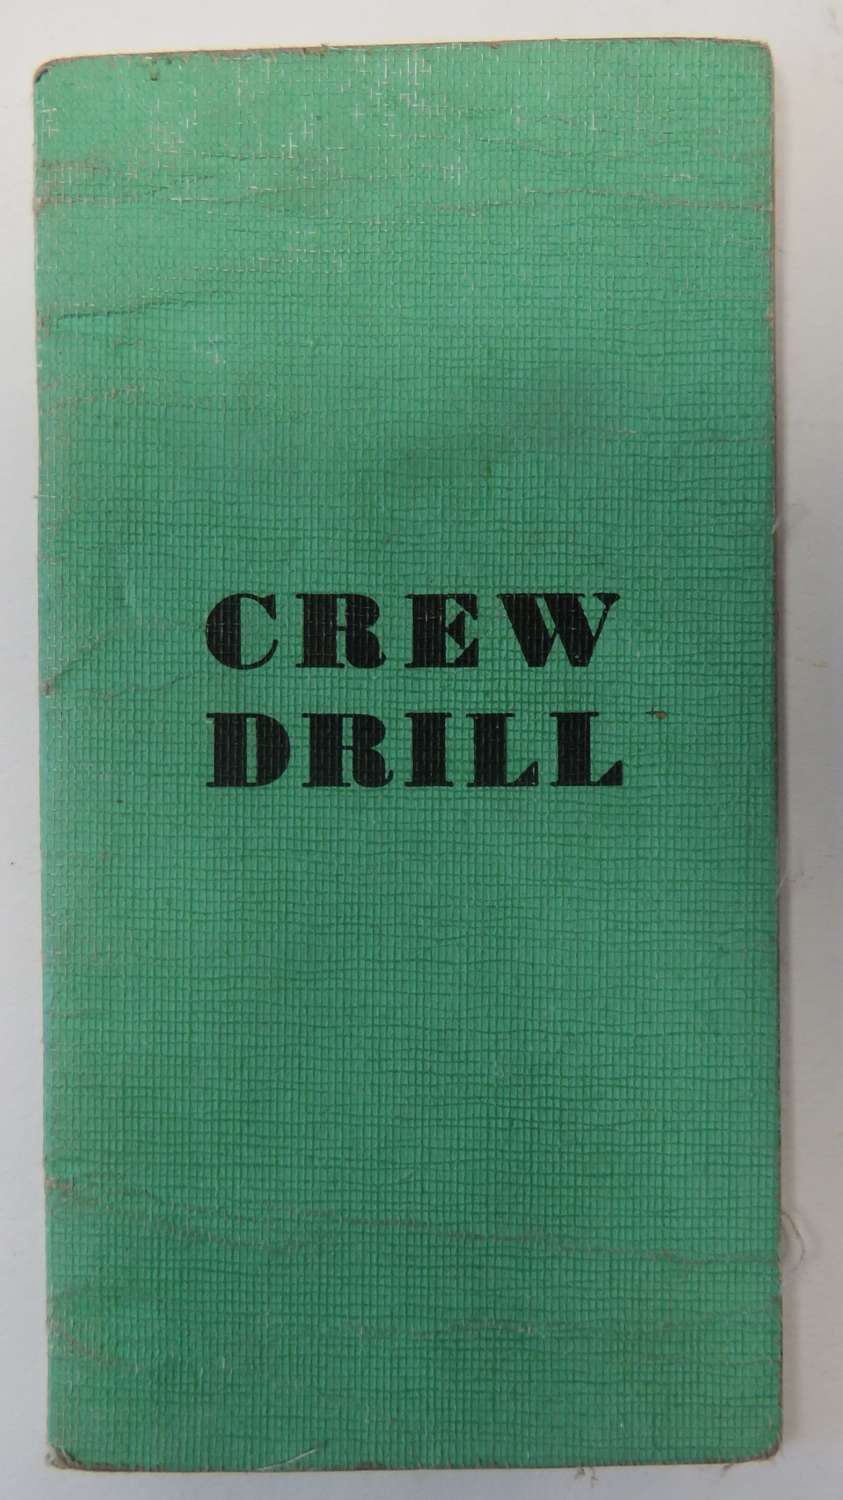 WW2 R.A.F Crew Drill for Escape from an Aircraft Booklet